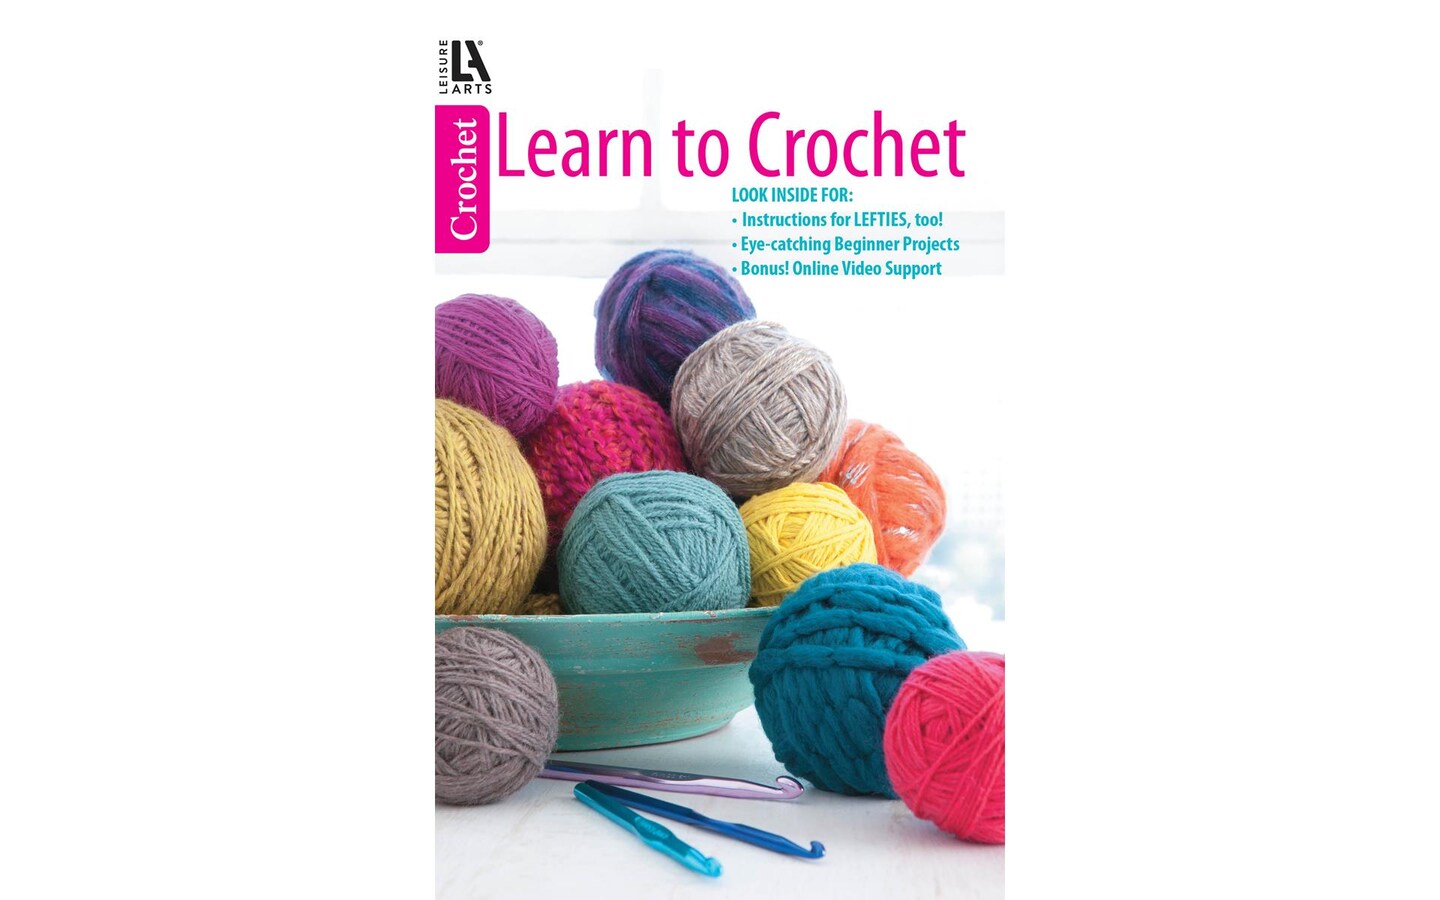 Easy Crochet Patterns: Simplified for Beginners